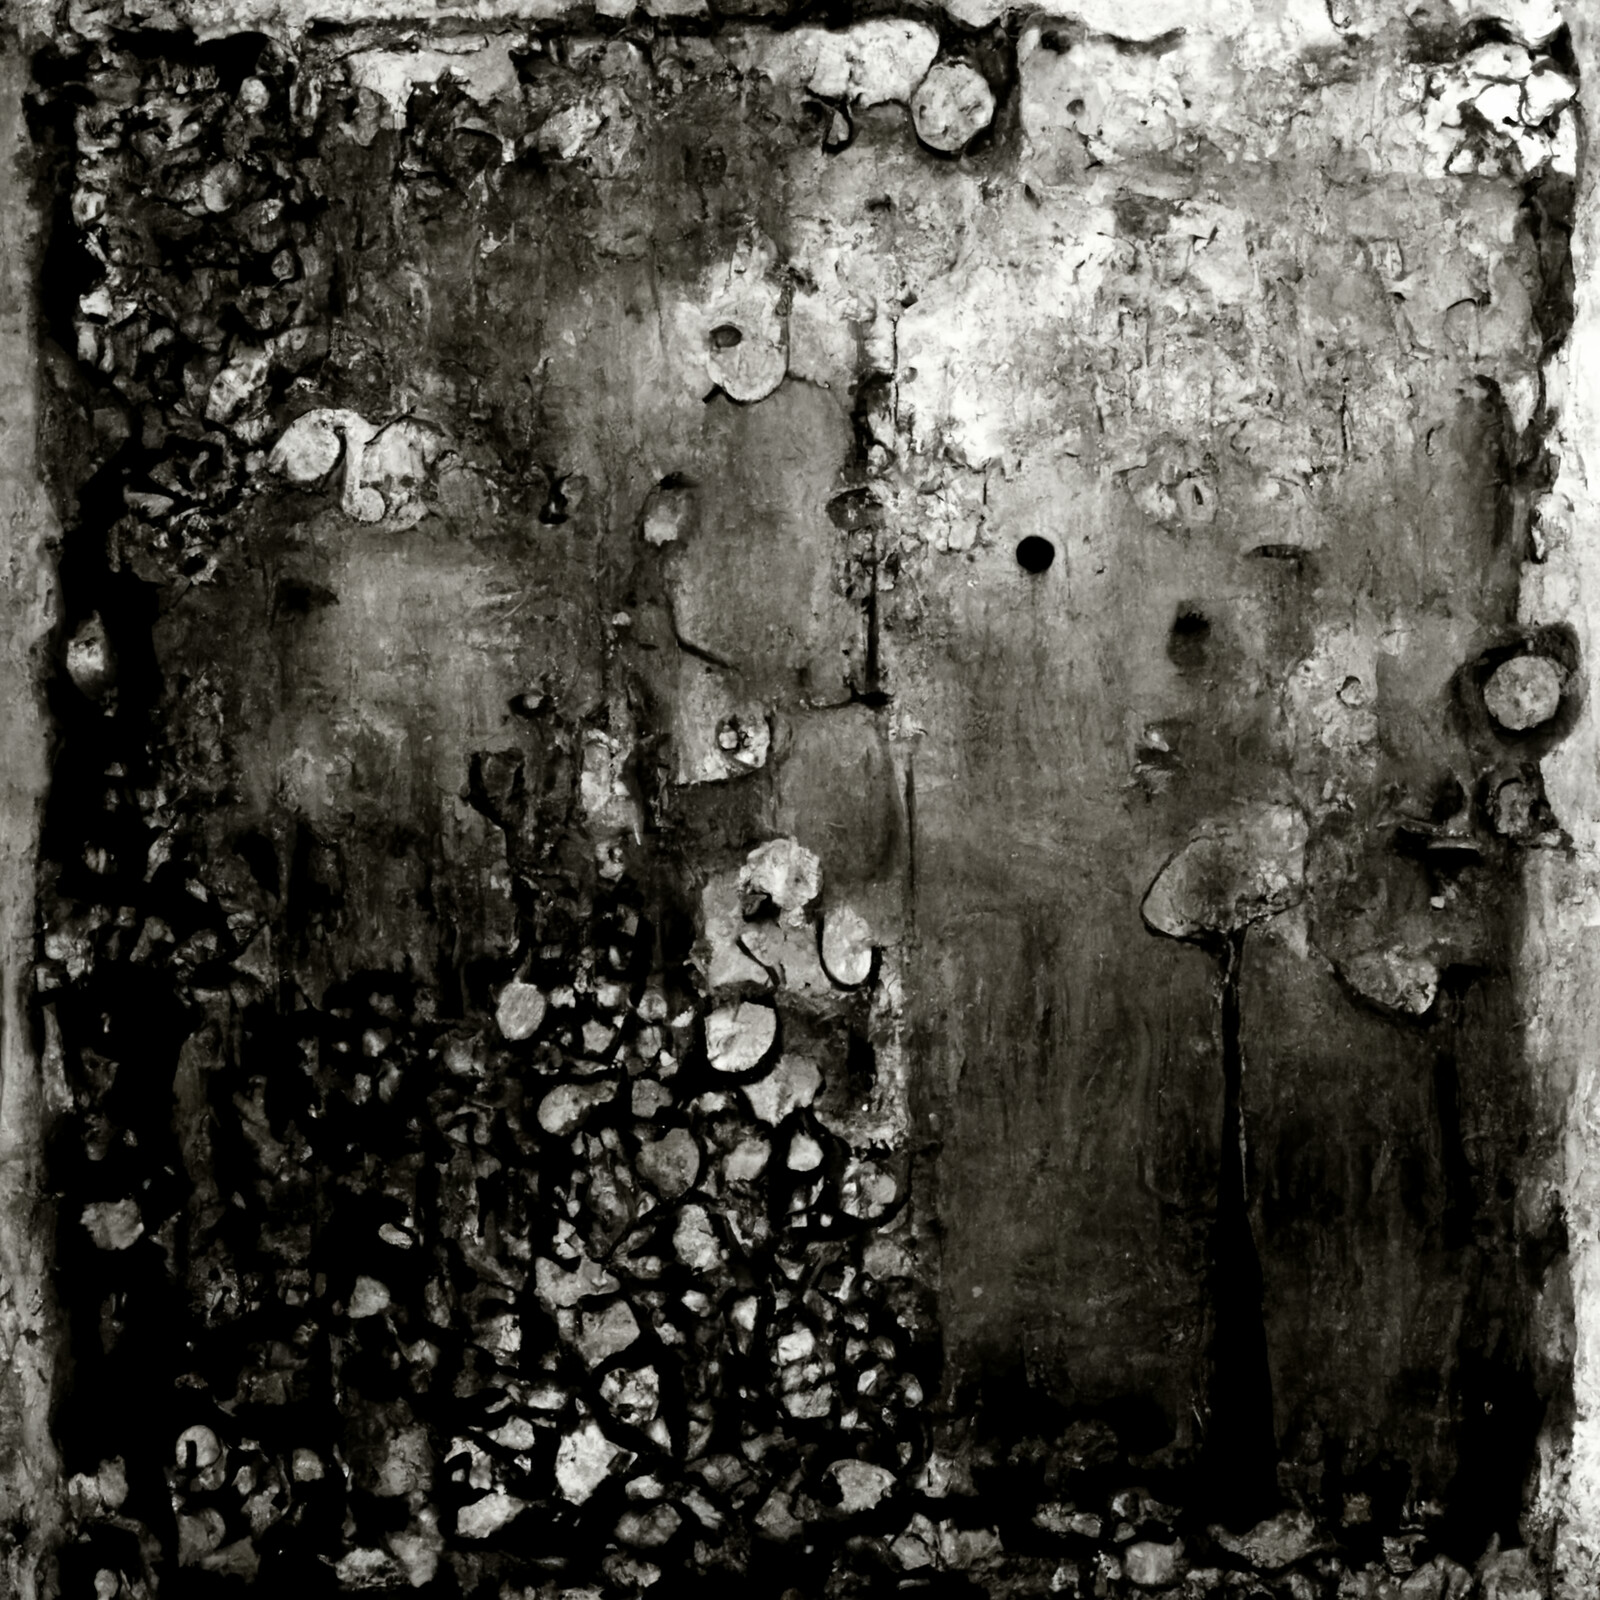 Grunge map creation test - raw outputs. Editing would be required to make tileable. (Prompt: "old rusted metal surface, black and white" )